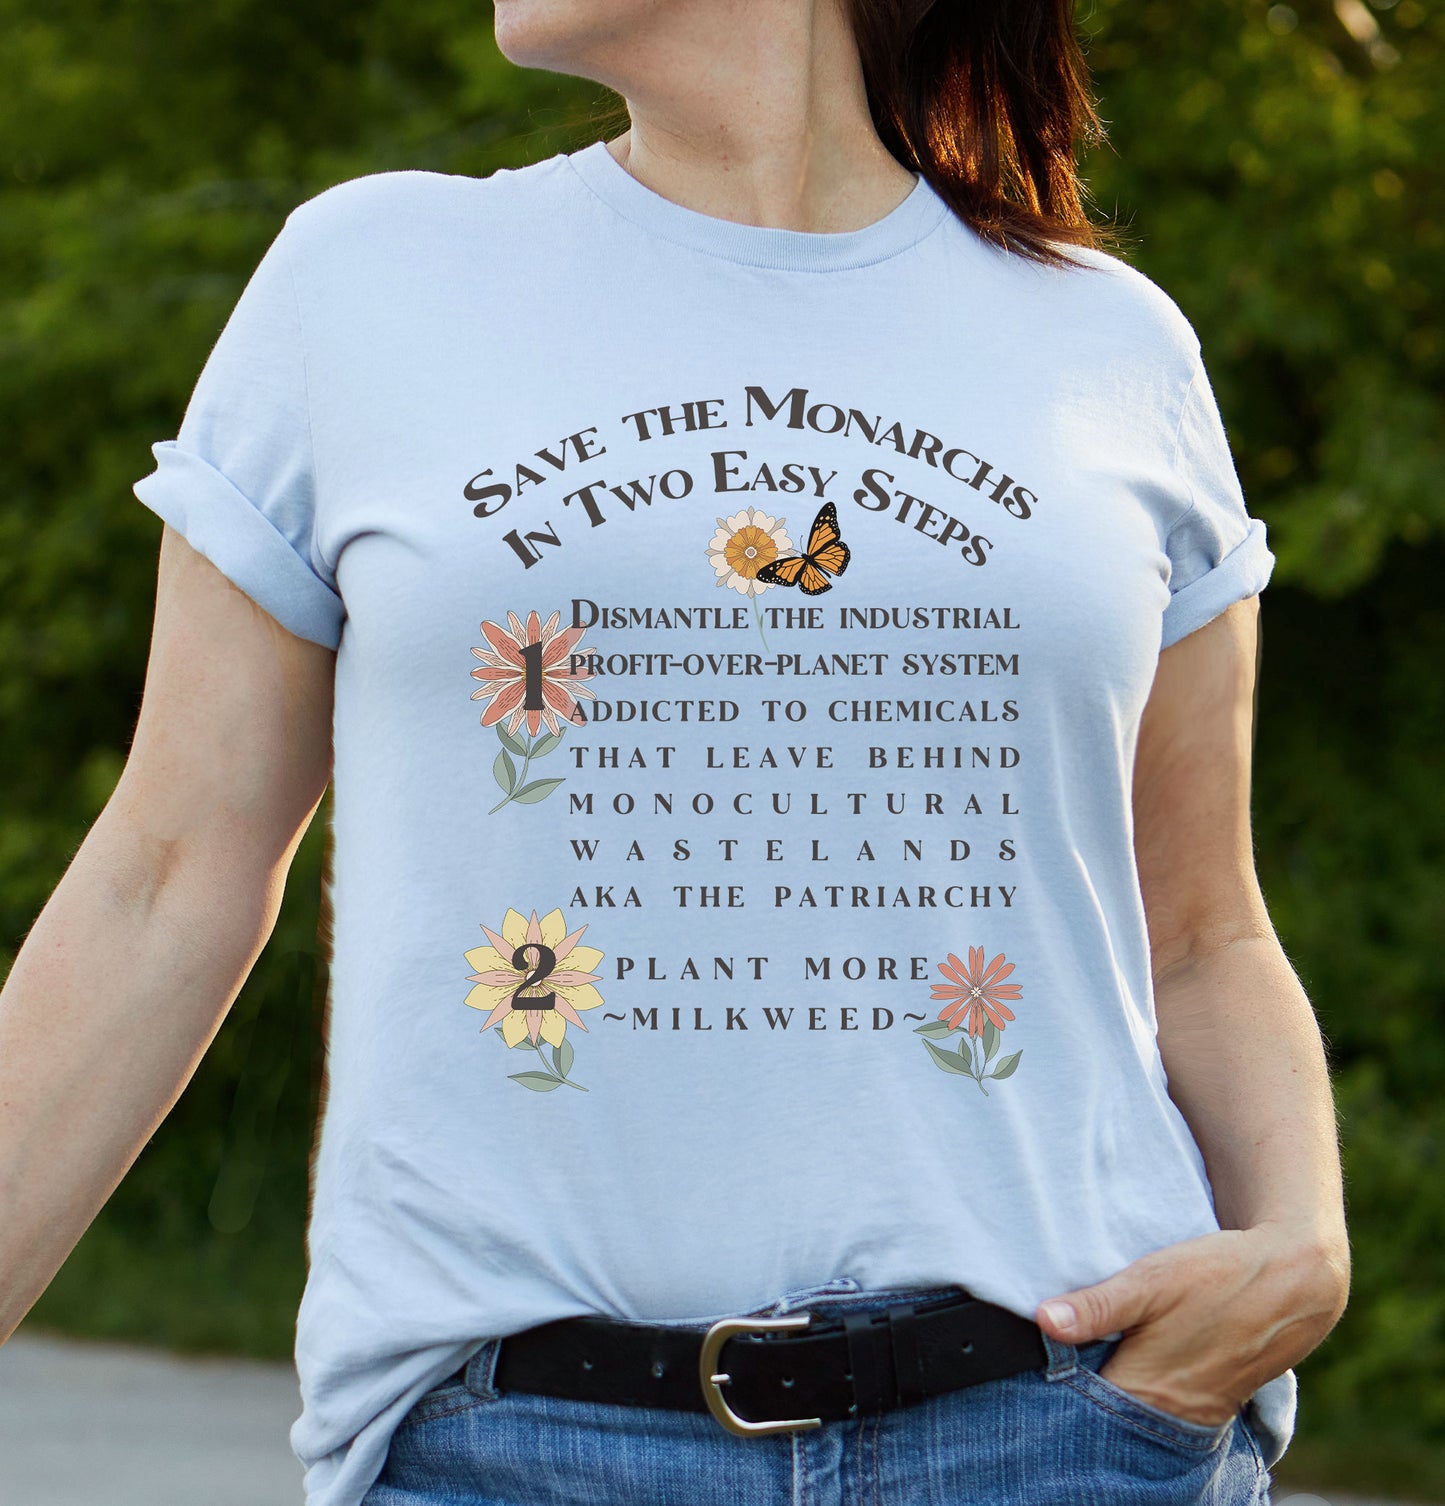 Save Monarchs tee, Nature t-shirt for conservation, Environmental science gift for ecological teachers, gardeners, In 2 Easy Steps!